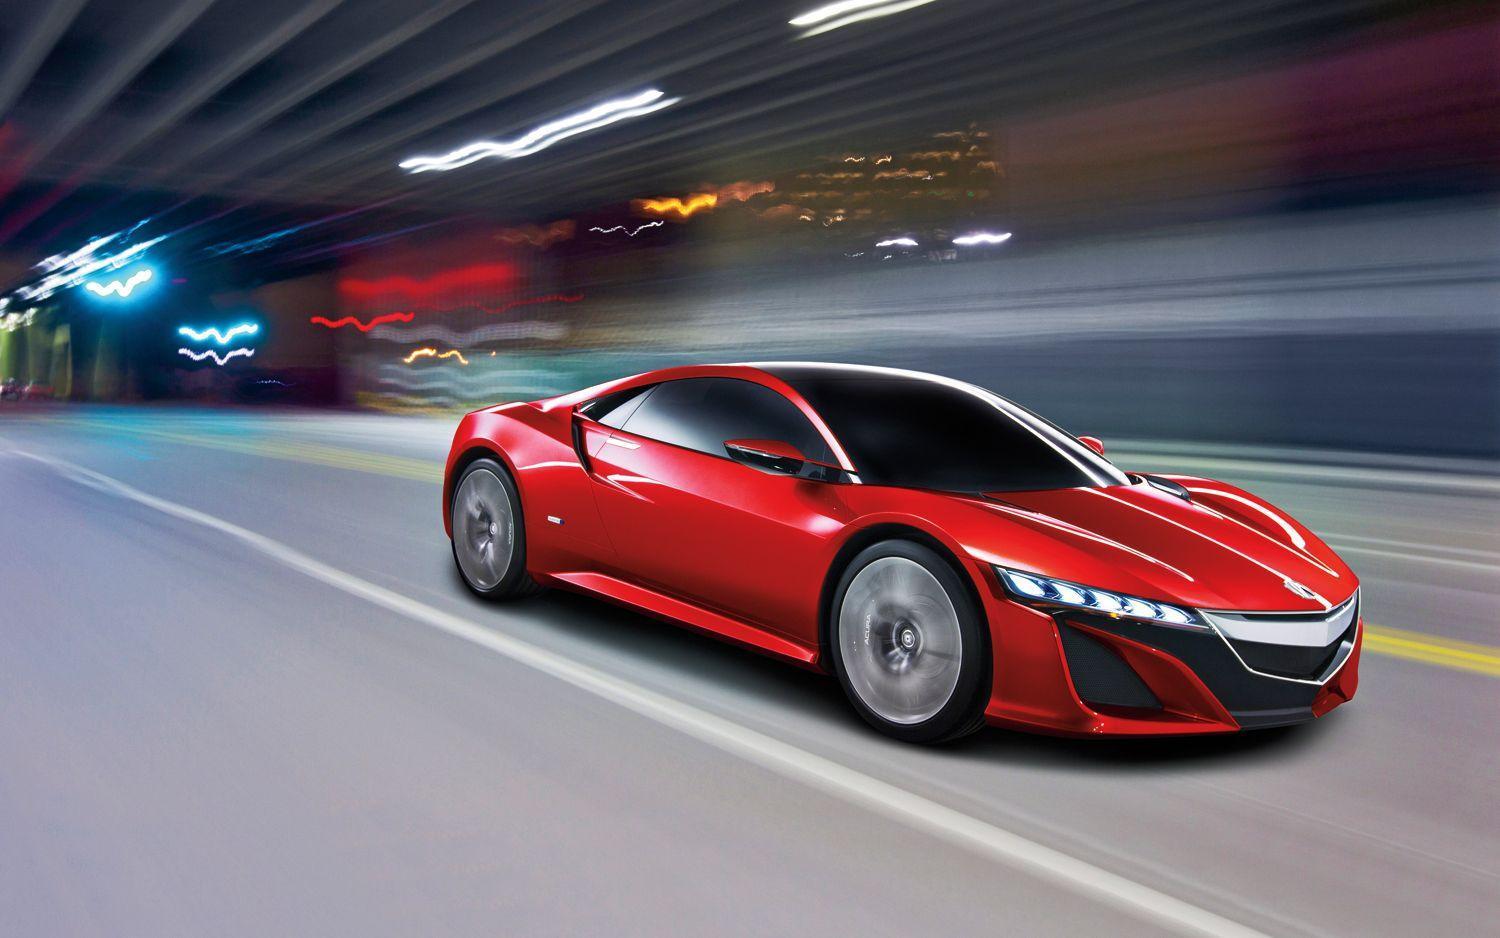 Acura NSX Wallpaper, Get Free top quality Acura NSX Wallpaper